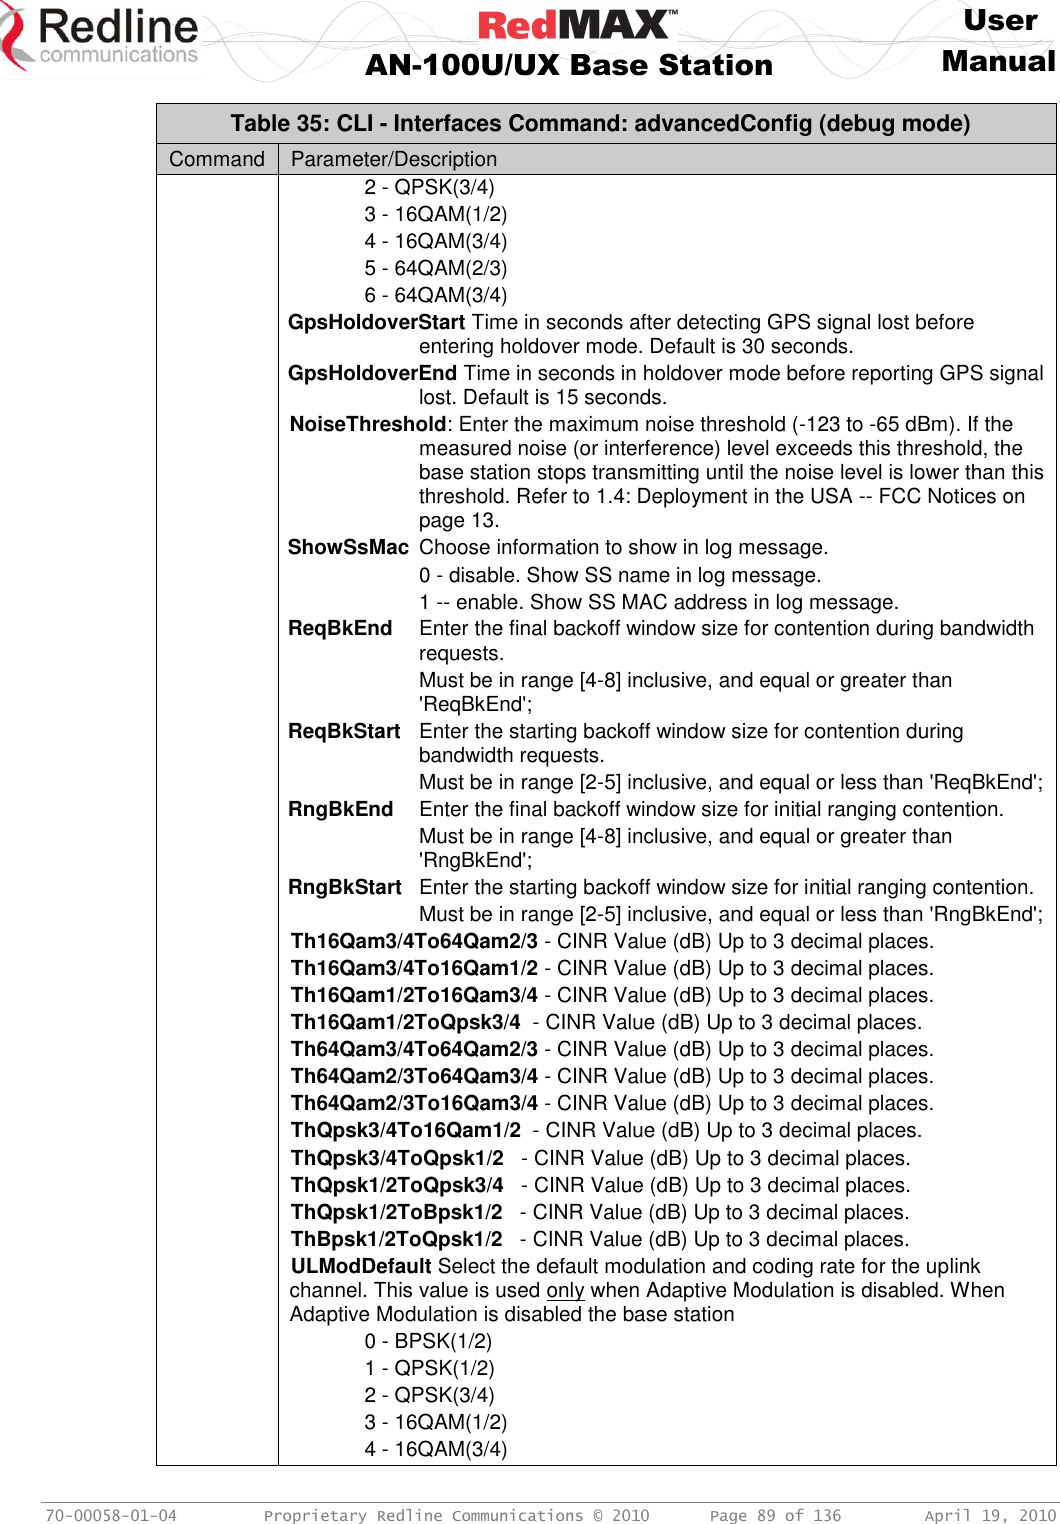     User  AN-100U/UX Base Station Manual   70-00058-01-04  Proprietary Redline Communications © 2010   Page 89 of 136  April 19, 2010 Table 35: CLI - Interfaces Command: advancedConfig (debug mode) Command Parameter/Description   2 - QPSK(3/4)  3 - 16QAM(1/2)  4 - 16QAM(3/4)  5 - 64QAM(2/3)  6 - 64QAM(3/4) GpsHoldoverStart Time in seconds after detecting GPS signal lost before entering holdover mode. Default is 30 seconds. GpsHoldoverEnd Time in seconds in holdover mode before reporting GPS signal lost. Default is 15 seconds. NoiseThreshold: Enter the maximum noise threshold (-123 to -65 dBm). If the measured noise (or interference) level exceeds this threshold, the base station stops transmitting until the noise level is lower than this threshold. Refer to 1.4: Deployment in the USA -- FCC Notices on page 13. ShowSsMac  Choose information to show in log message.  0 - disable. Show SS name in log message.  1 -- enable. Show SS MAC address in log message. ReqBkEnd  Enter the final backoff window size for contention during bandwidth requests.   Must be in range [4-8] inclusive, and equal or greater than &apos;ReqBkEnd&apos;; ReqBkStart  Enter the starting backoff window size for contention during bandwidth requests.   Must be in range [2-5] inclusive, and equal or less than &apos;ReqBkEnd&apos;; RngBkEnd  Enter the final backoff window size for initial ranging contention.   Must be in range [4-8] inclusive, and equal or greater than &apos;RngBkEnd&apos;; RngBkStart  Enter the starting backoff window size for initial ranging contention.   Must be in range [2-5] inclusive, and equal or less than &apos;RngBkEnd&apos;; Th16Qam3/4To64Qam2/3 - CINR Value (dB) Up to 3 decimal places. Th16Qam3/4To16Qam1/2 - CINR Value (dB) Up to 3 decimal places. Th16Qam1/2To16Qam3/4 - CINR Value (dB) Up to 3 decimal places. Th16Qam1/2ToQpsk3/4  - CINR Value (dB) Up to 3 decimal places. Th64Qam3/4To64Qam2/3 - CINR Value (dB) Up to 3 decimal places. Th64Qam2/3To64Qam3/4 - CINR Value (dB) Up to 3 decimal places. Th64Qam2/3To16Qam3/4 - CINR Value (dB) Up to 3 decimal places. ThQpsk3/4To16Qam1/2  - CINR Value (dB) Up to 3 decimal places. ThQpsk3/4ToQpsk1/2   - CINR Value (dB) Up to 3 decimal places. ThQpsk1/2ToQpsk3/4   - CINR Value (dB) Up to 3 decimal places. ThQpsk1/2ToBpsk1/2   - CINR Value (dB) Up to 3 decimal places. ThBpsk1/2ToQpsk1/2   - CINR Value (dB) Up to 3 decimal places.  ULModDefault Select the default modulation and coding rate for the uplink channel. This value is used only when Adaptive Modulation is disabled. When Adaptive Modulation is disabled the base station  0 - BPSK(1/2)  1 - QPSK(1/2)  2 - QPSK(3/4)  3 - 16QAM(1/2)  4 - 16QAM(3/4) 